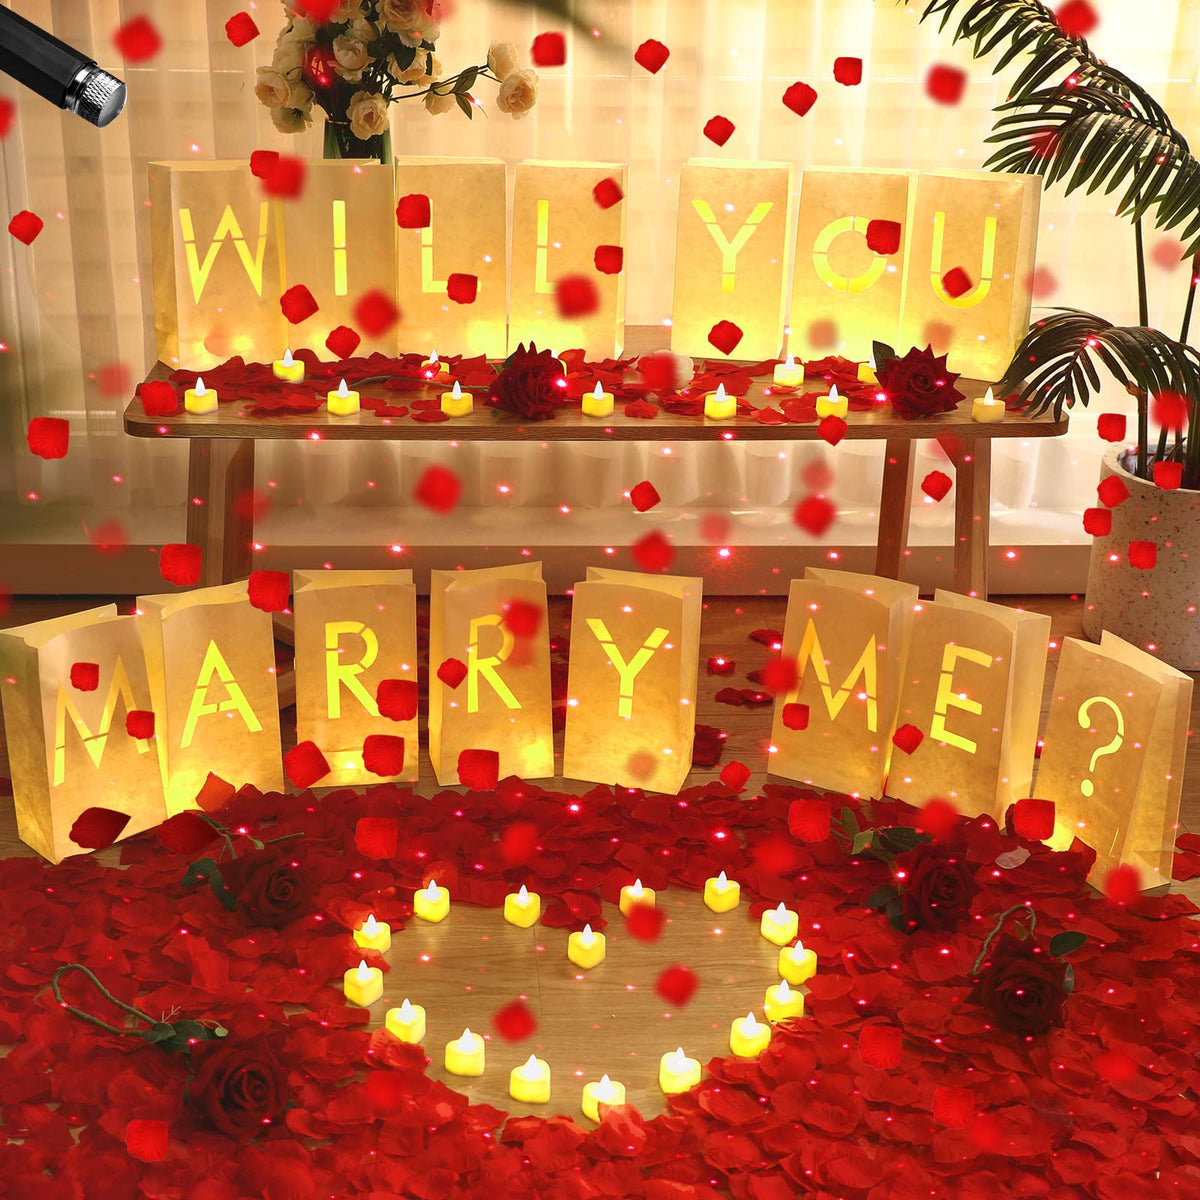 Rose Pedals and Candles Kit 3000 Packs Artificial Rose Petals for Romantic  Night 72 Pcs Fake Heart Candles Heart Shape LED Light Wedding Night